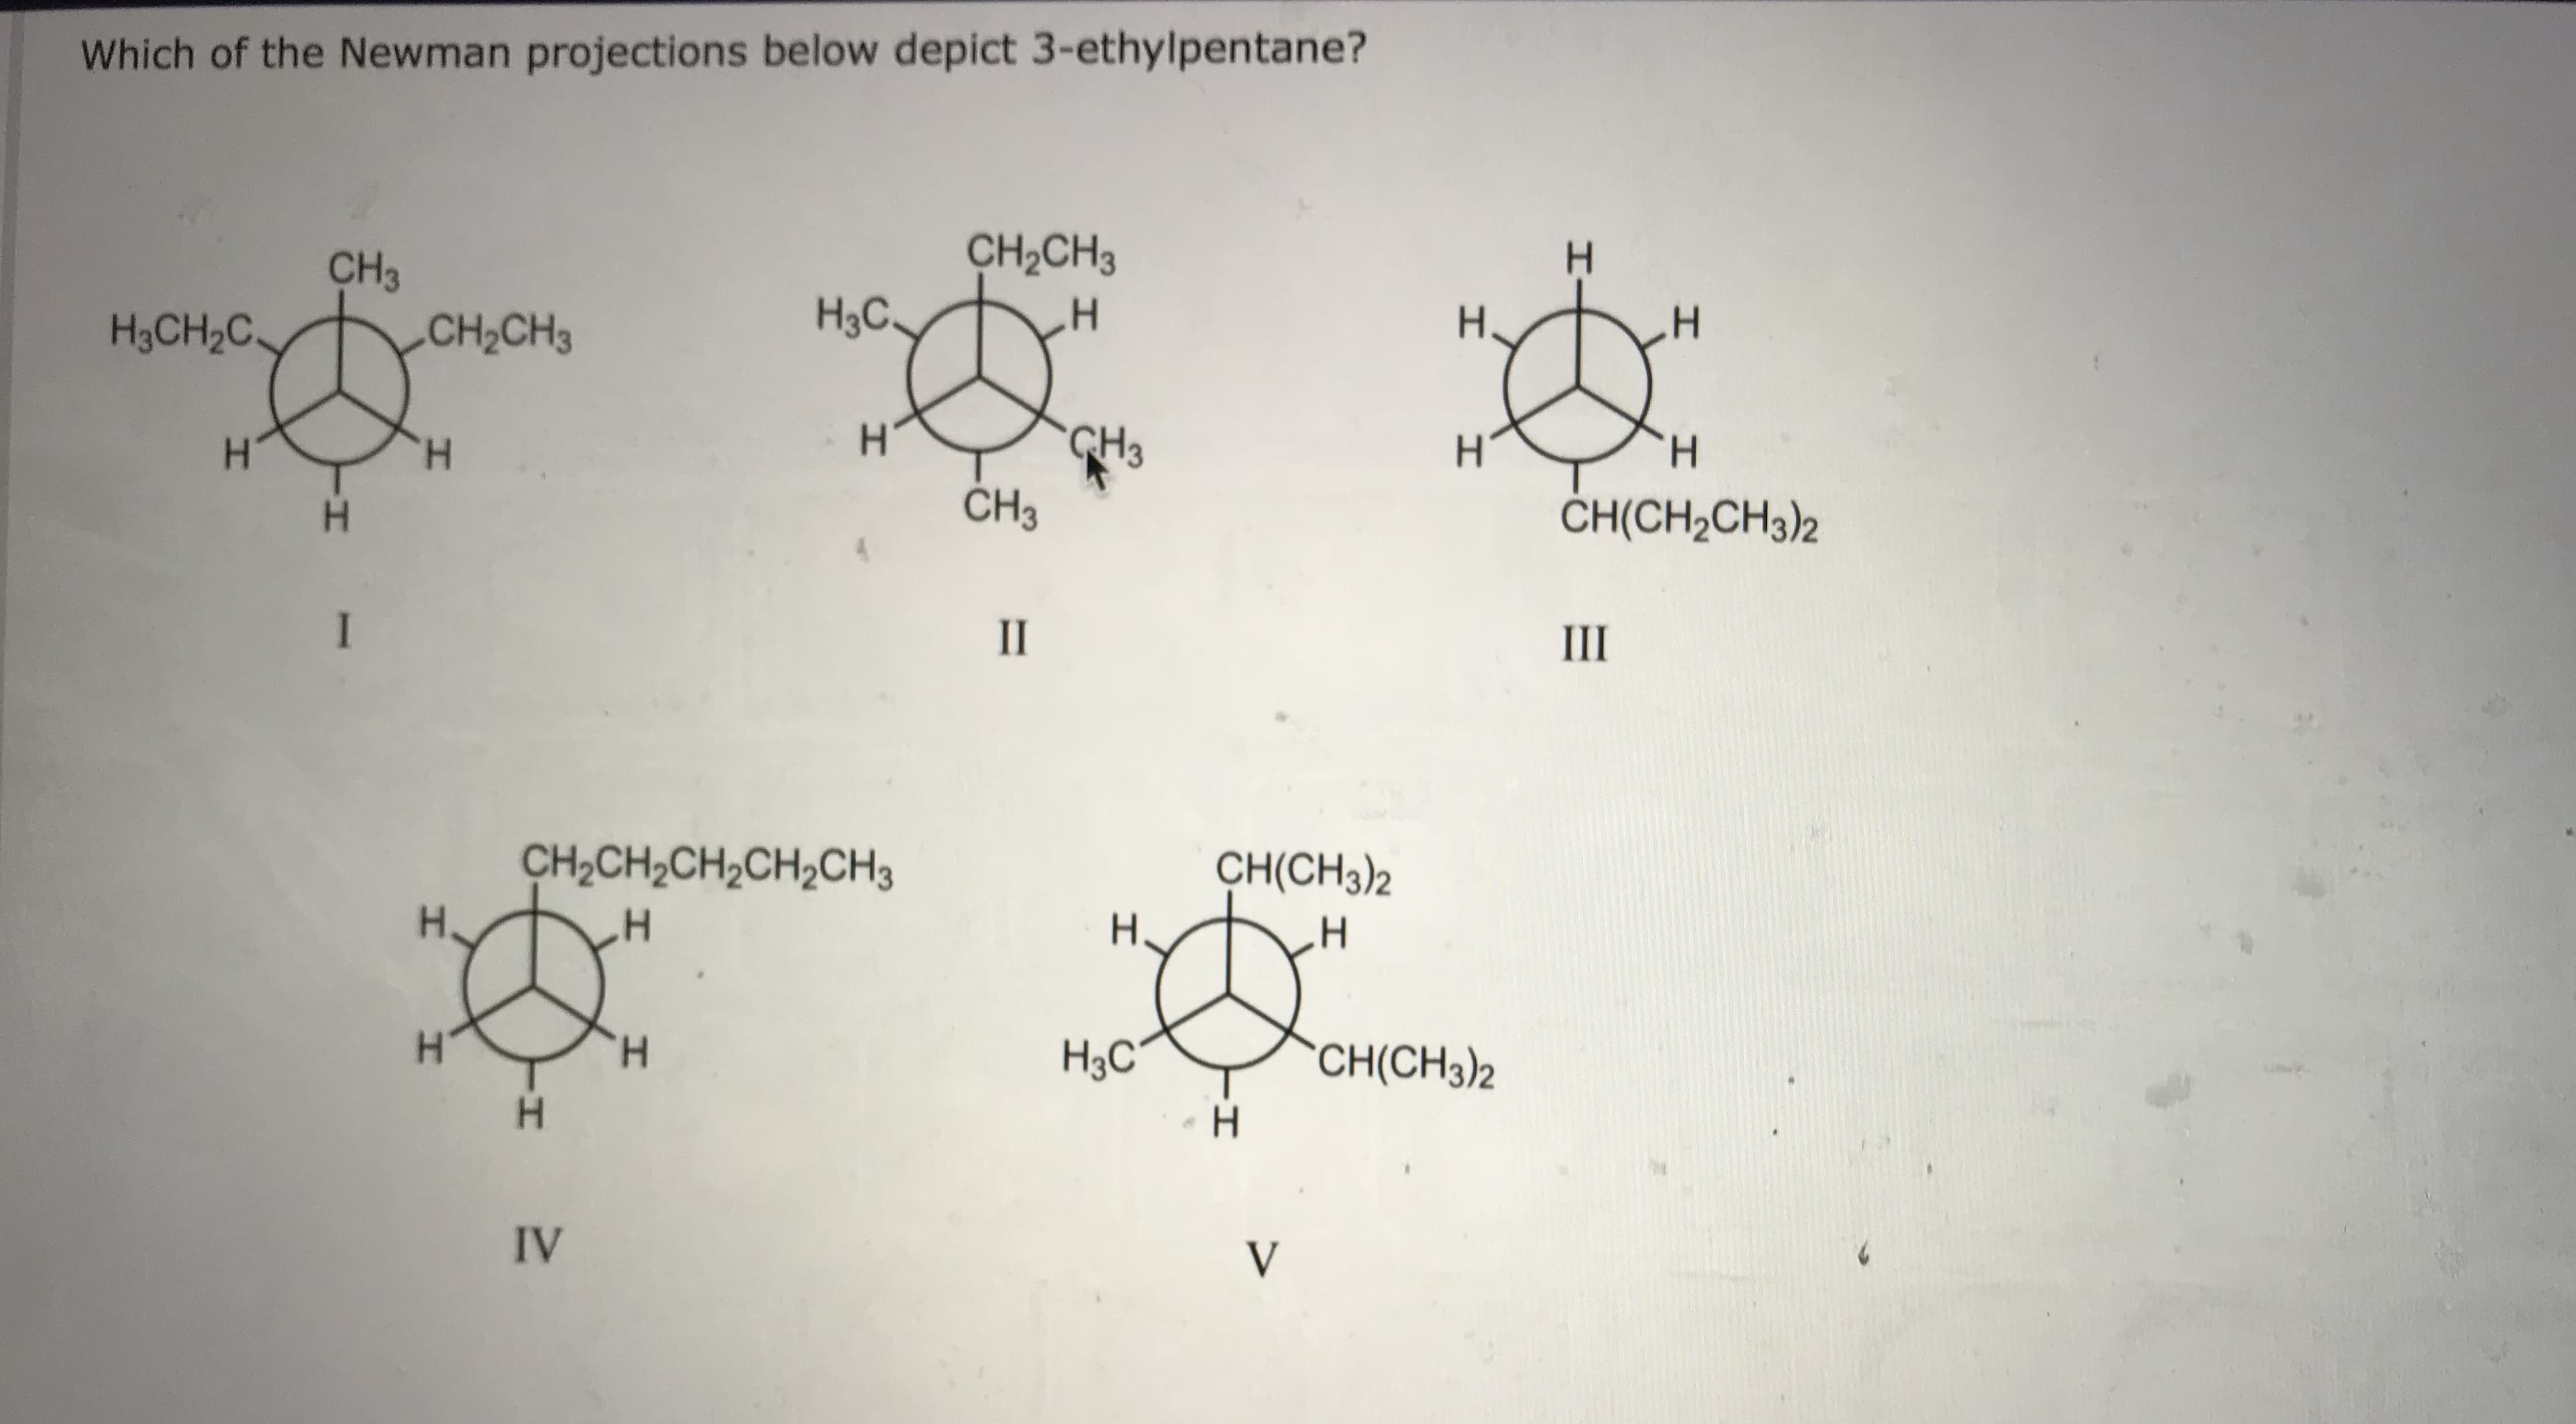 Which of the Newman projections below depict 3-ethylpentane?
CH3
CH2CH3
H.
H3CH2C
CH2CH3
H3C.
H.
CH3
ČH3
H.
H.
H.
ČH(CH2CH3)2
I
II
III
CH2CH,CH,CH,CH3
CH(CH3)2
H,
H.
H.
H.
H3C~
CH(CH3)2
H.
IV
V
